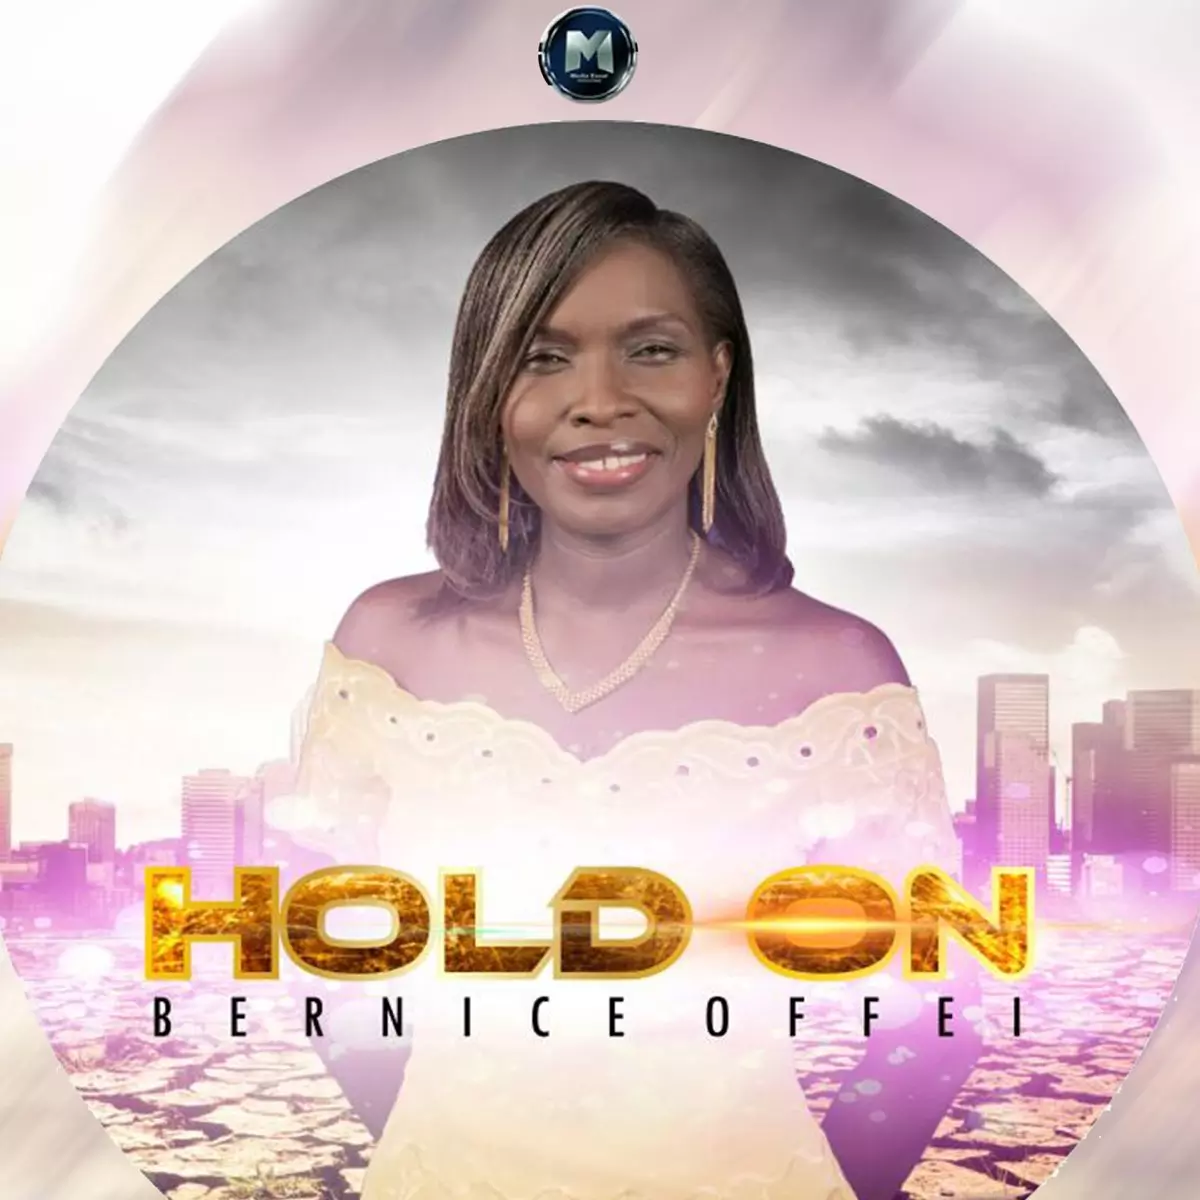 Hold On by Bernice Offei on Apple Music